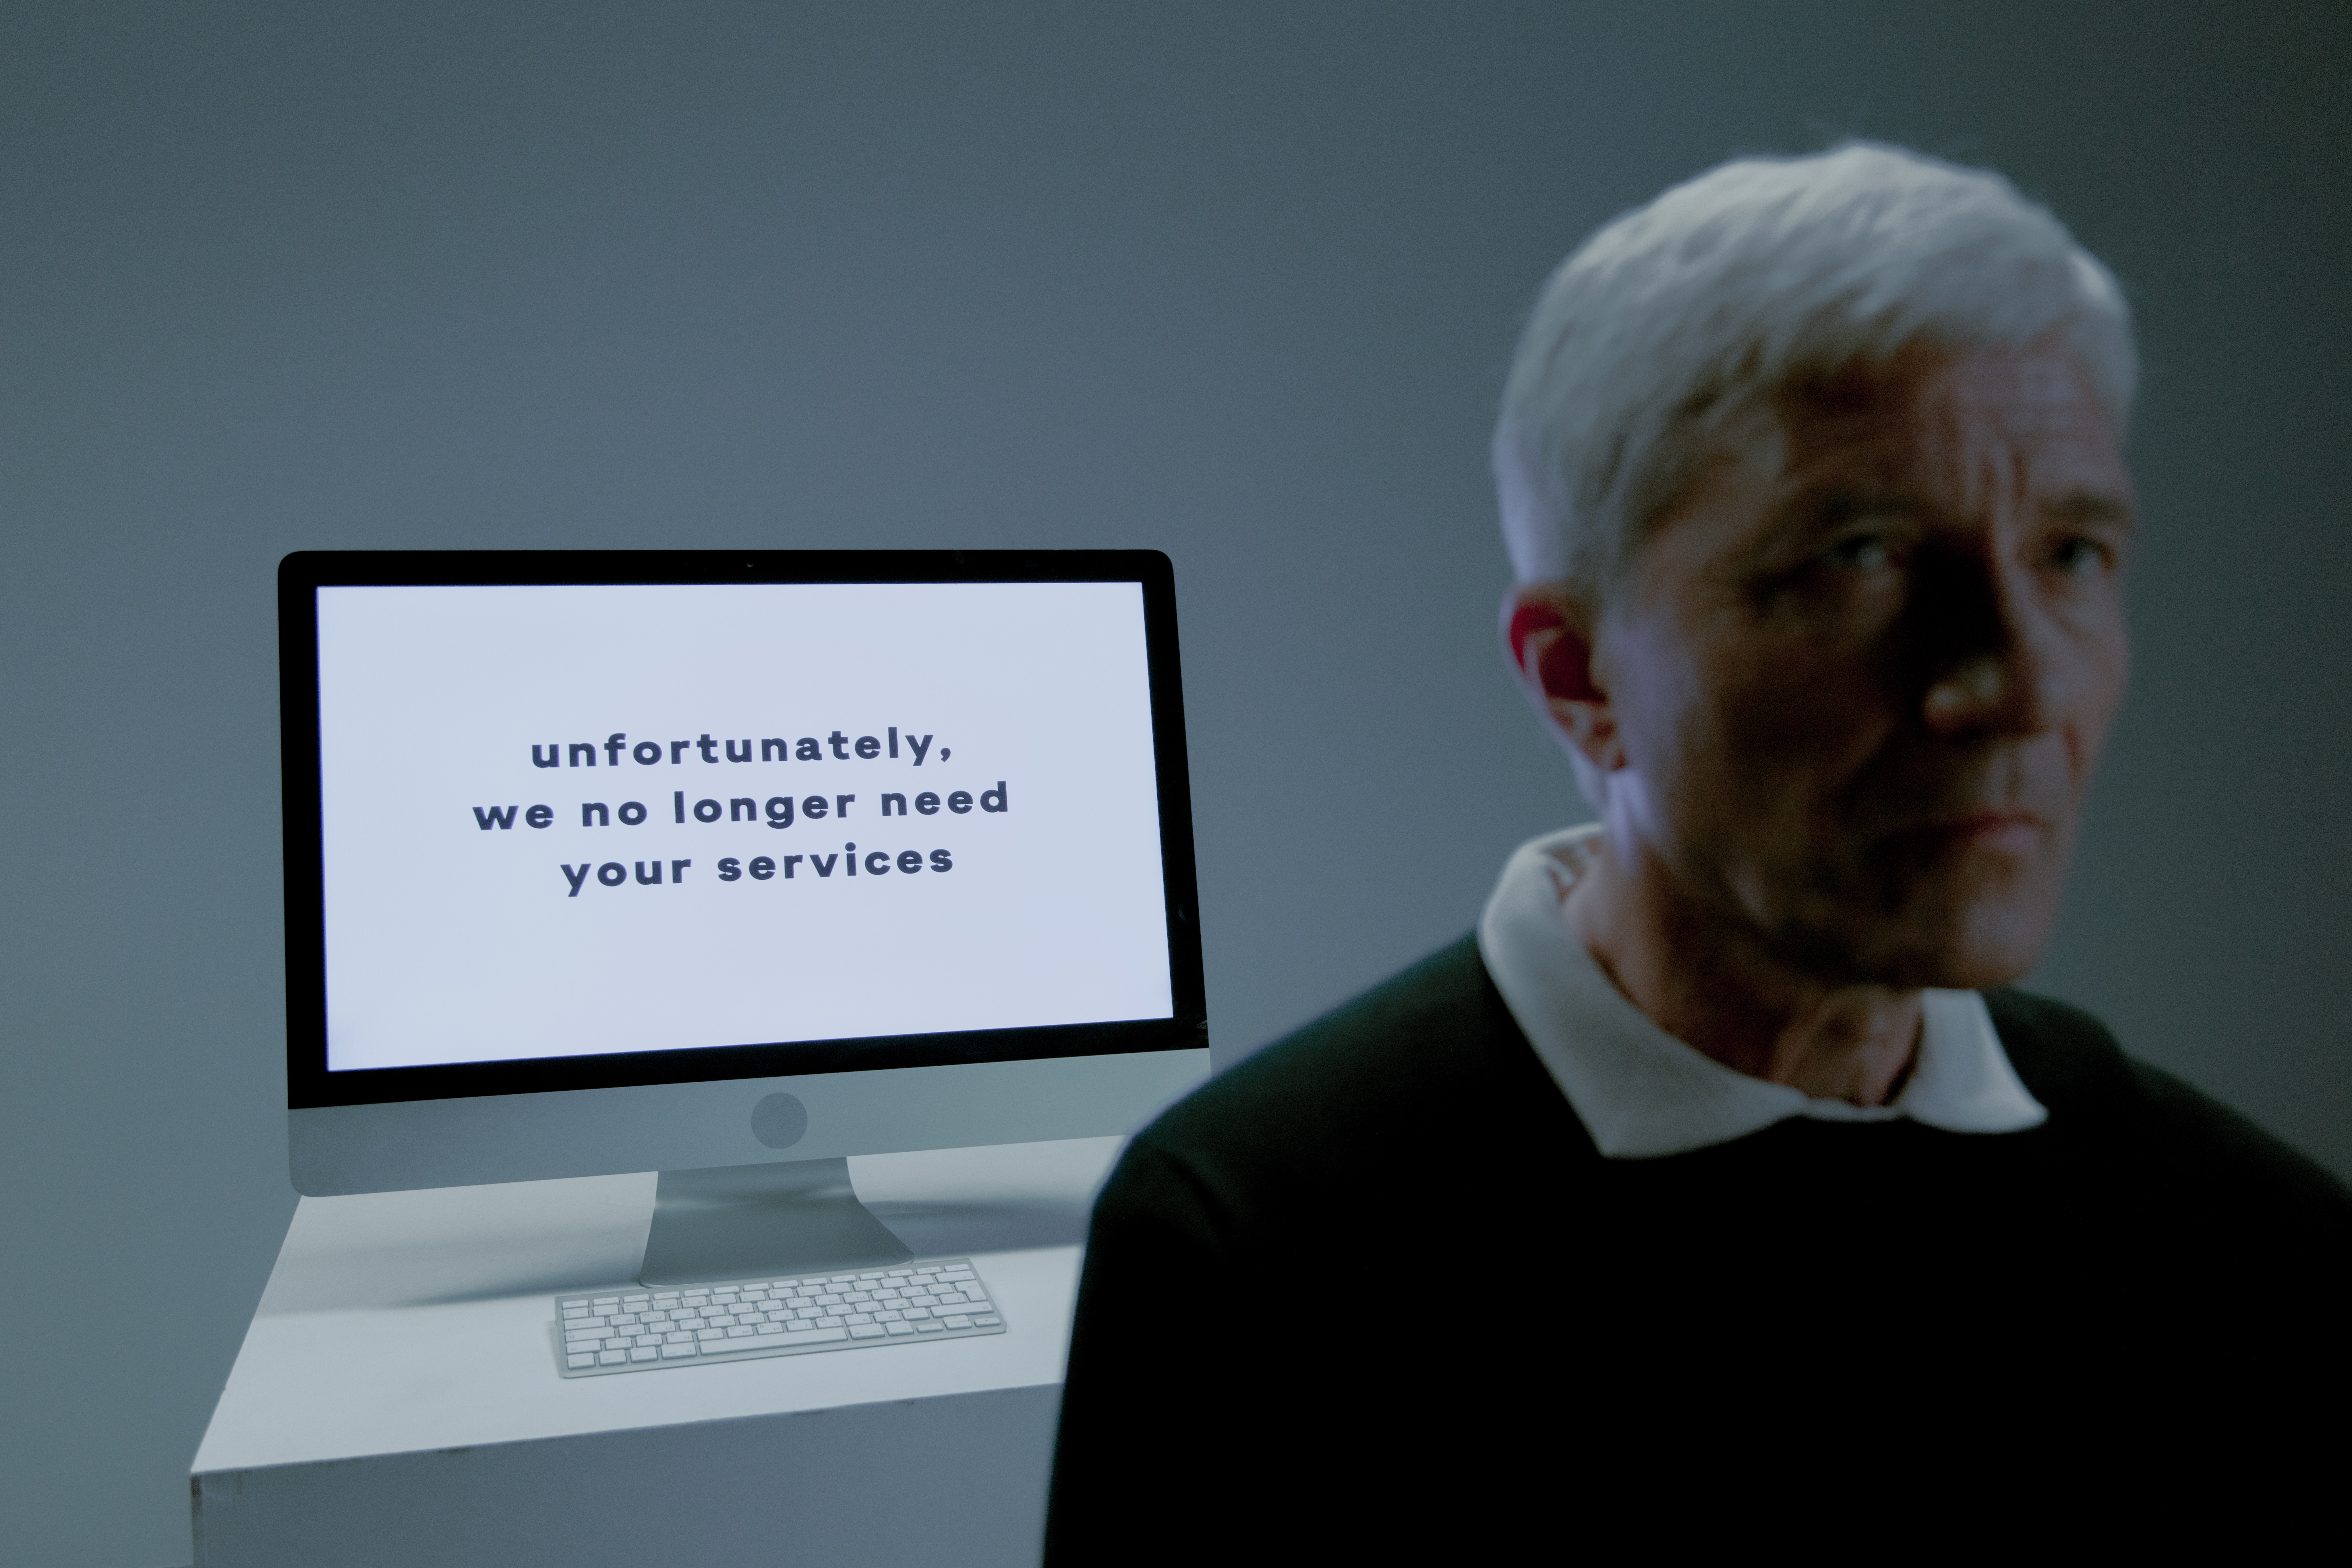 older man in front of computer with "unfortunately we no longer need your services" on the screen